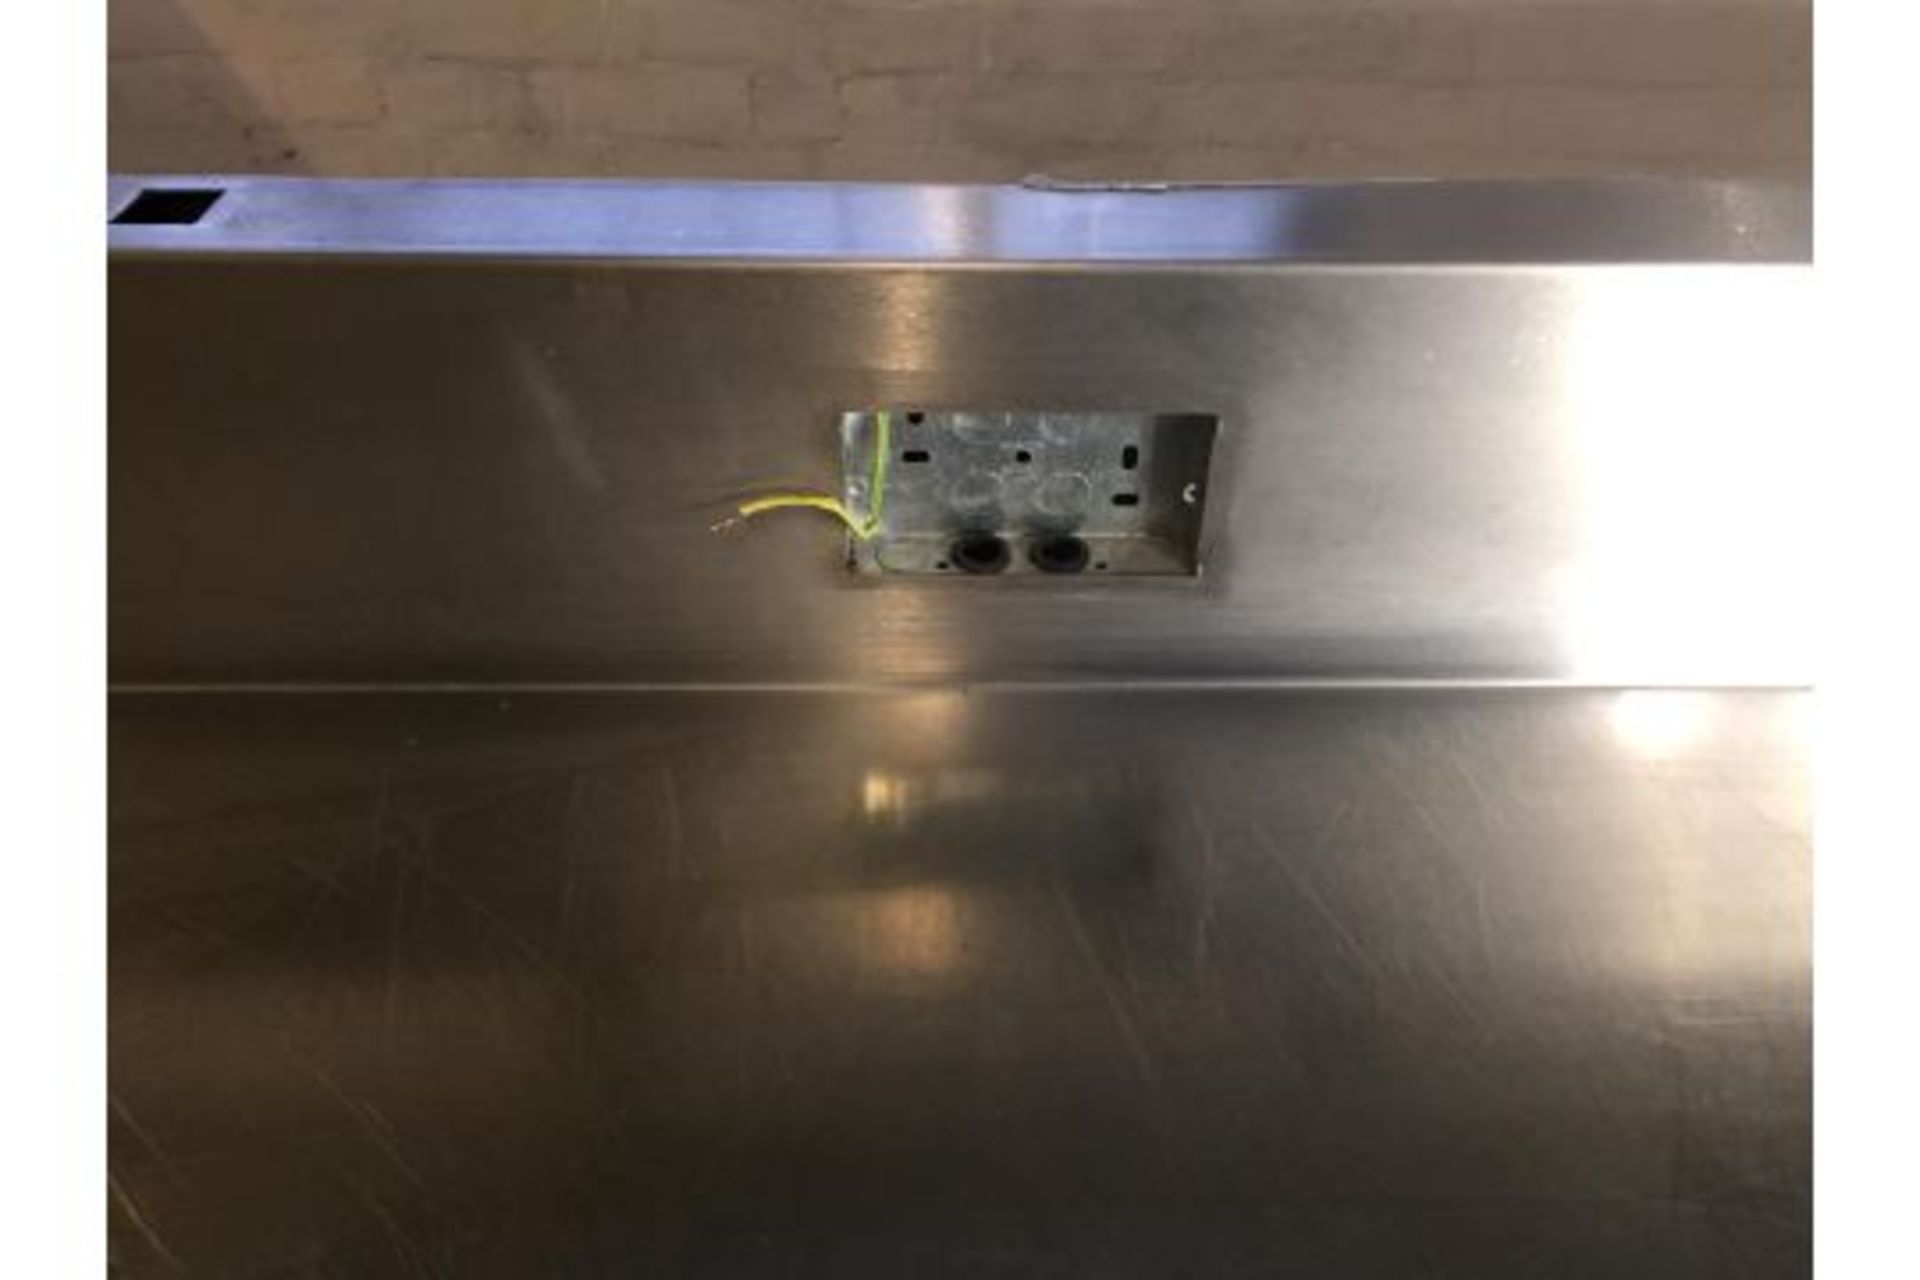 Stainless steel counter top with plug inserts - Image 2 of 4